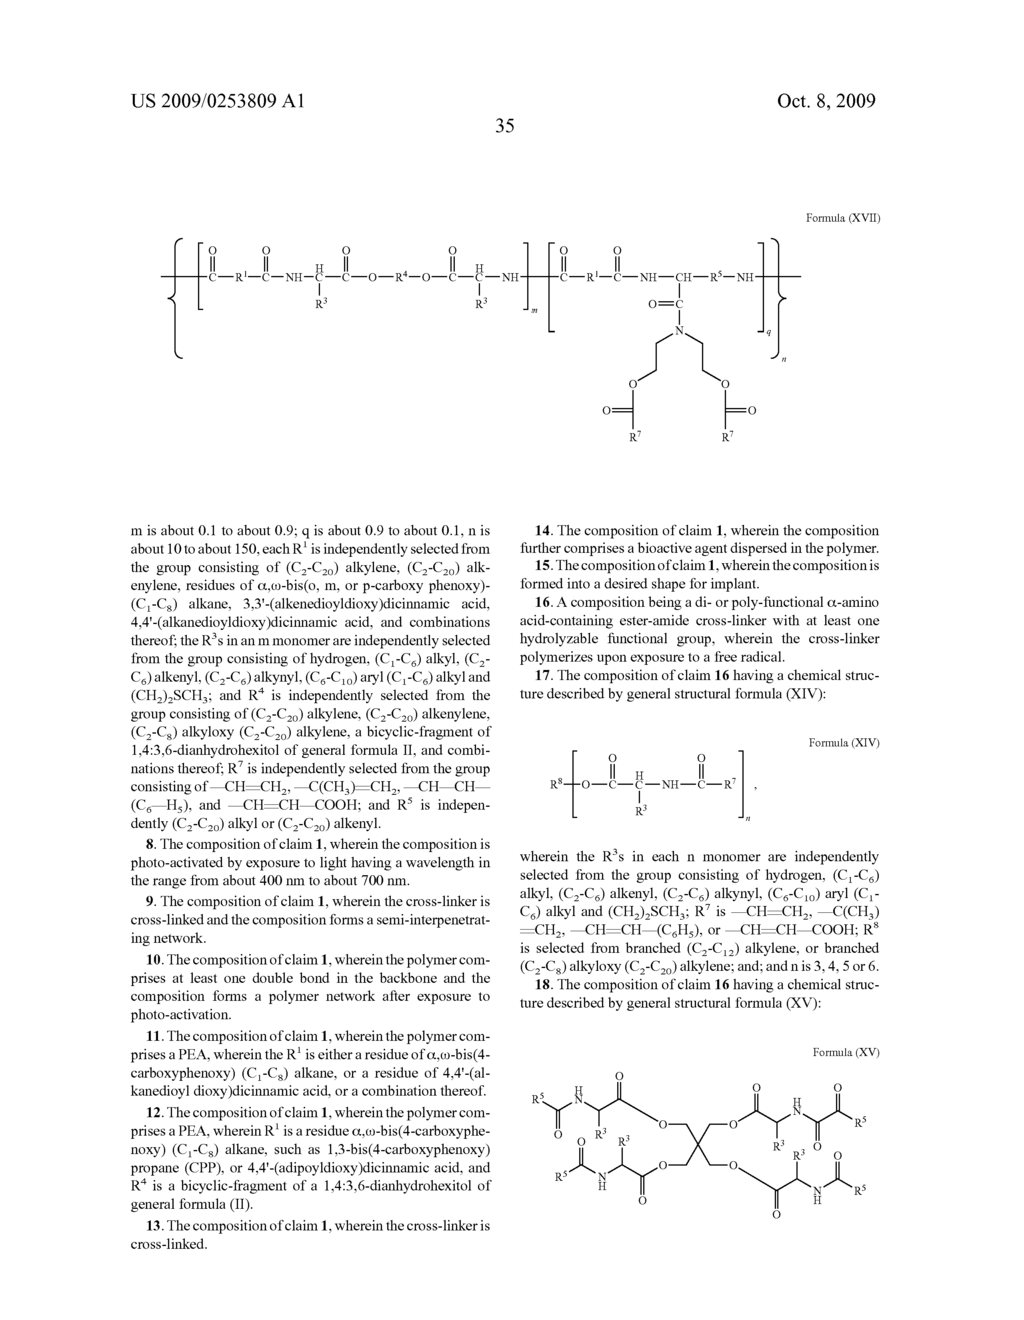 BIOABSORBABLE ELASTOMERIC POLYMER NETWORKS, CROSS-LINKERS AND METHODS OF USE - diagram, schematic, and image 44